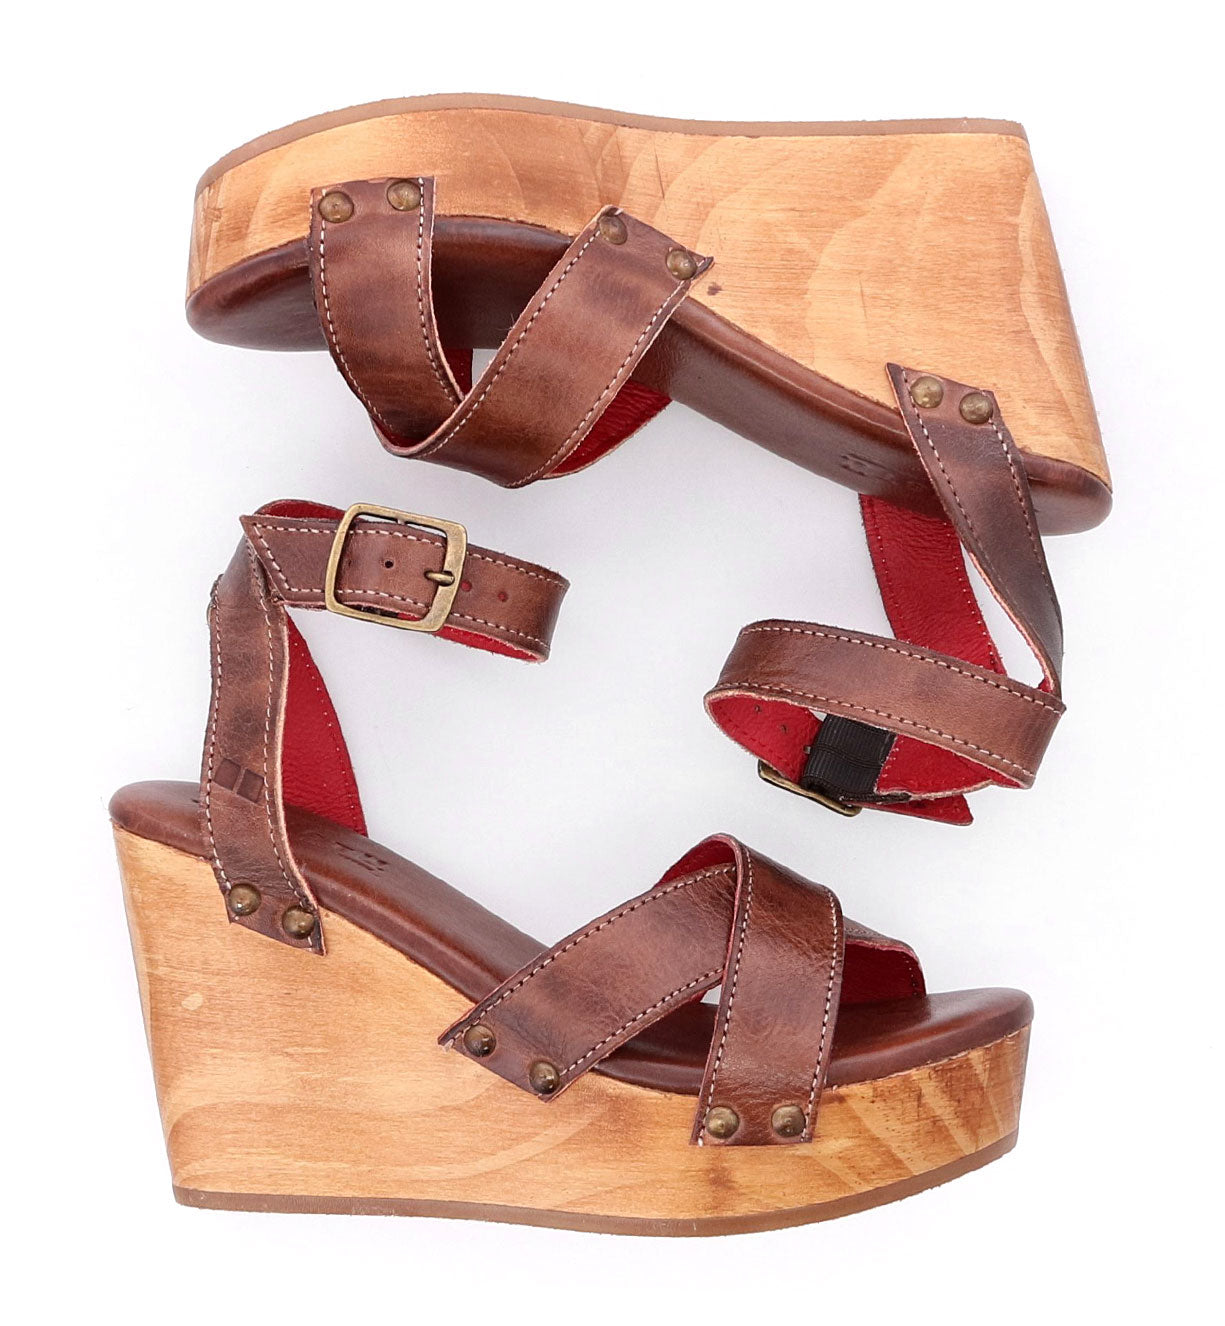 A pair of Grettell wooden wedge sandals with red straps from Bed Stu.